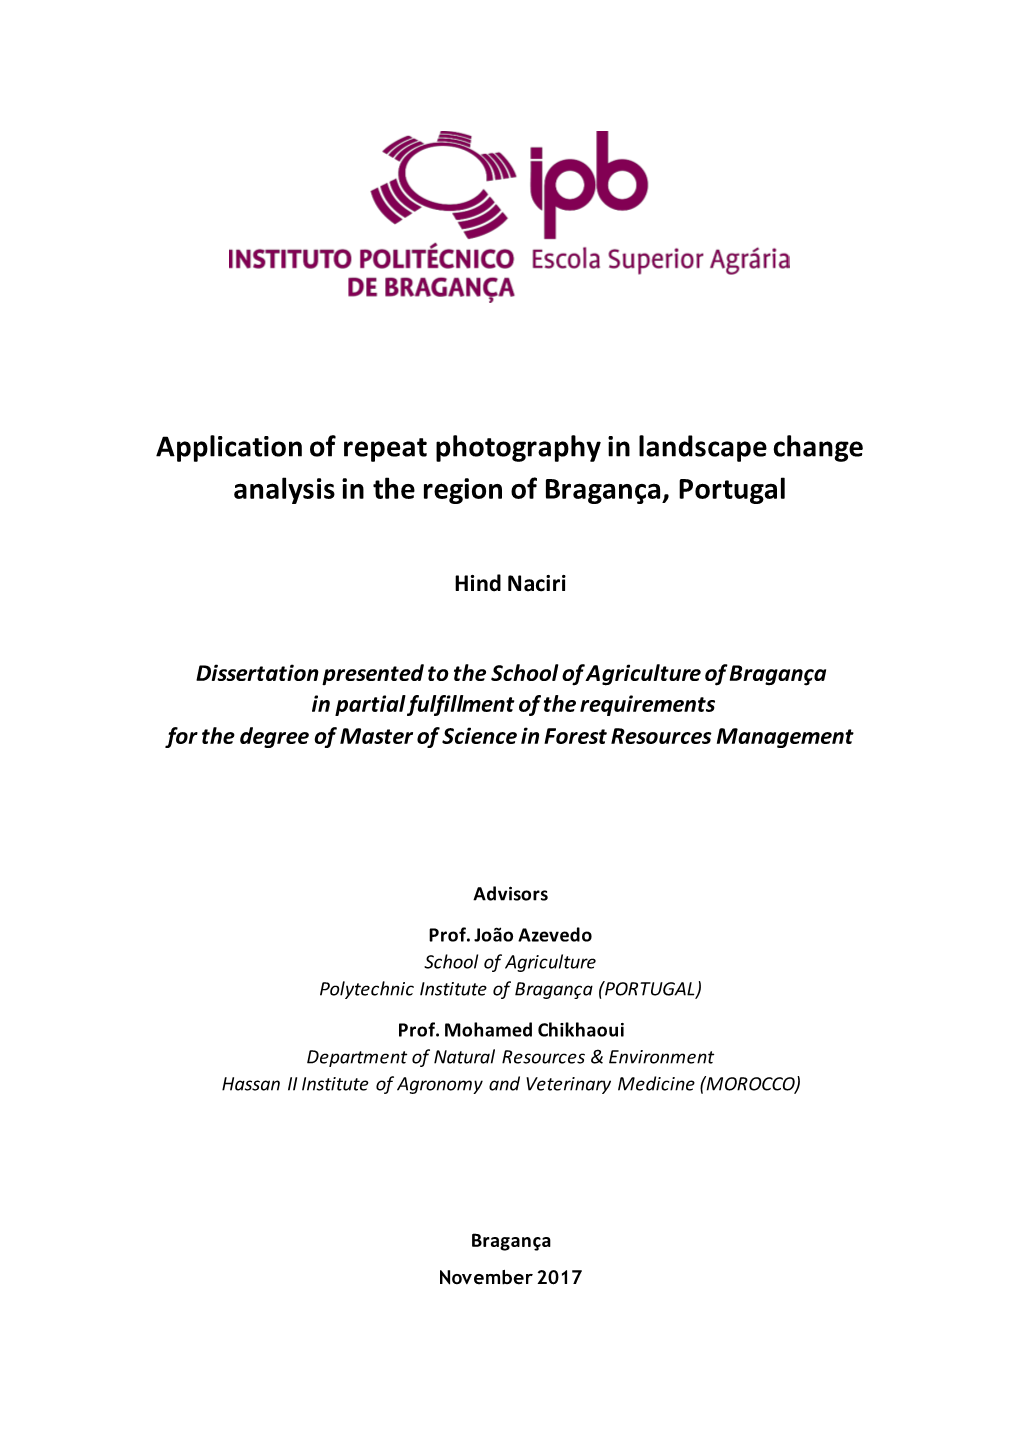 Application of Repeat Photography in Landscape Change Analysis in the Region of Bragança, Portugal